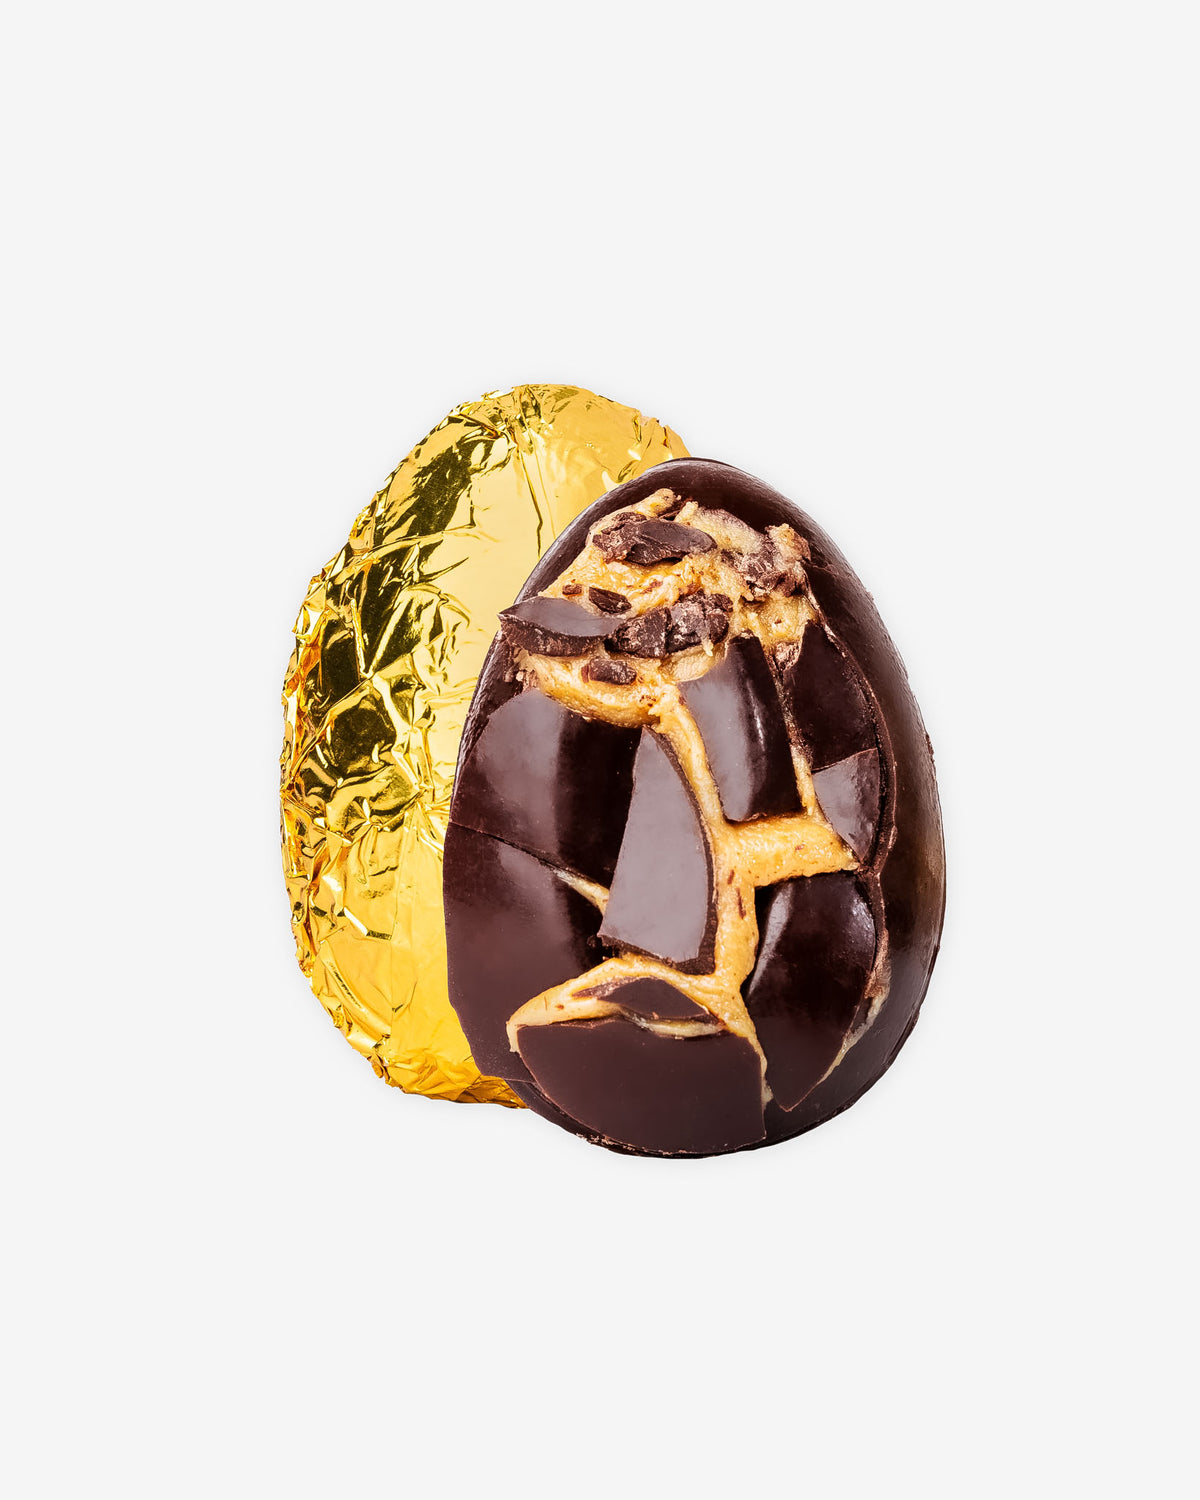 Award Winning Chocolate Peanut Butter Eggs - Luxury Chocolate Gifts and Easter Chocolates by Compartes